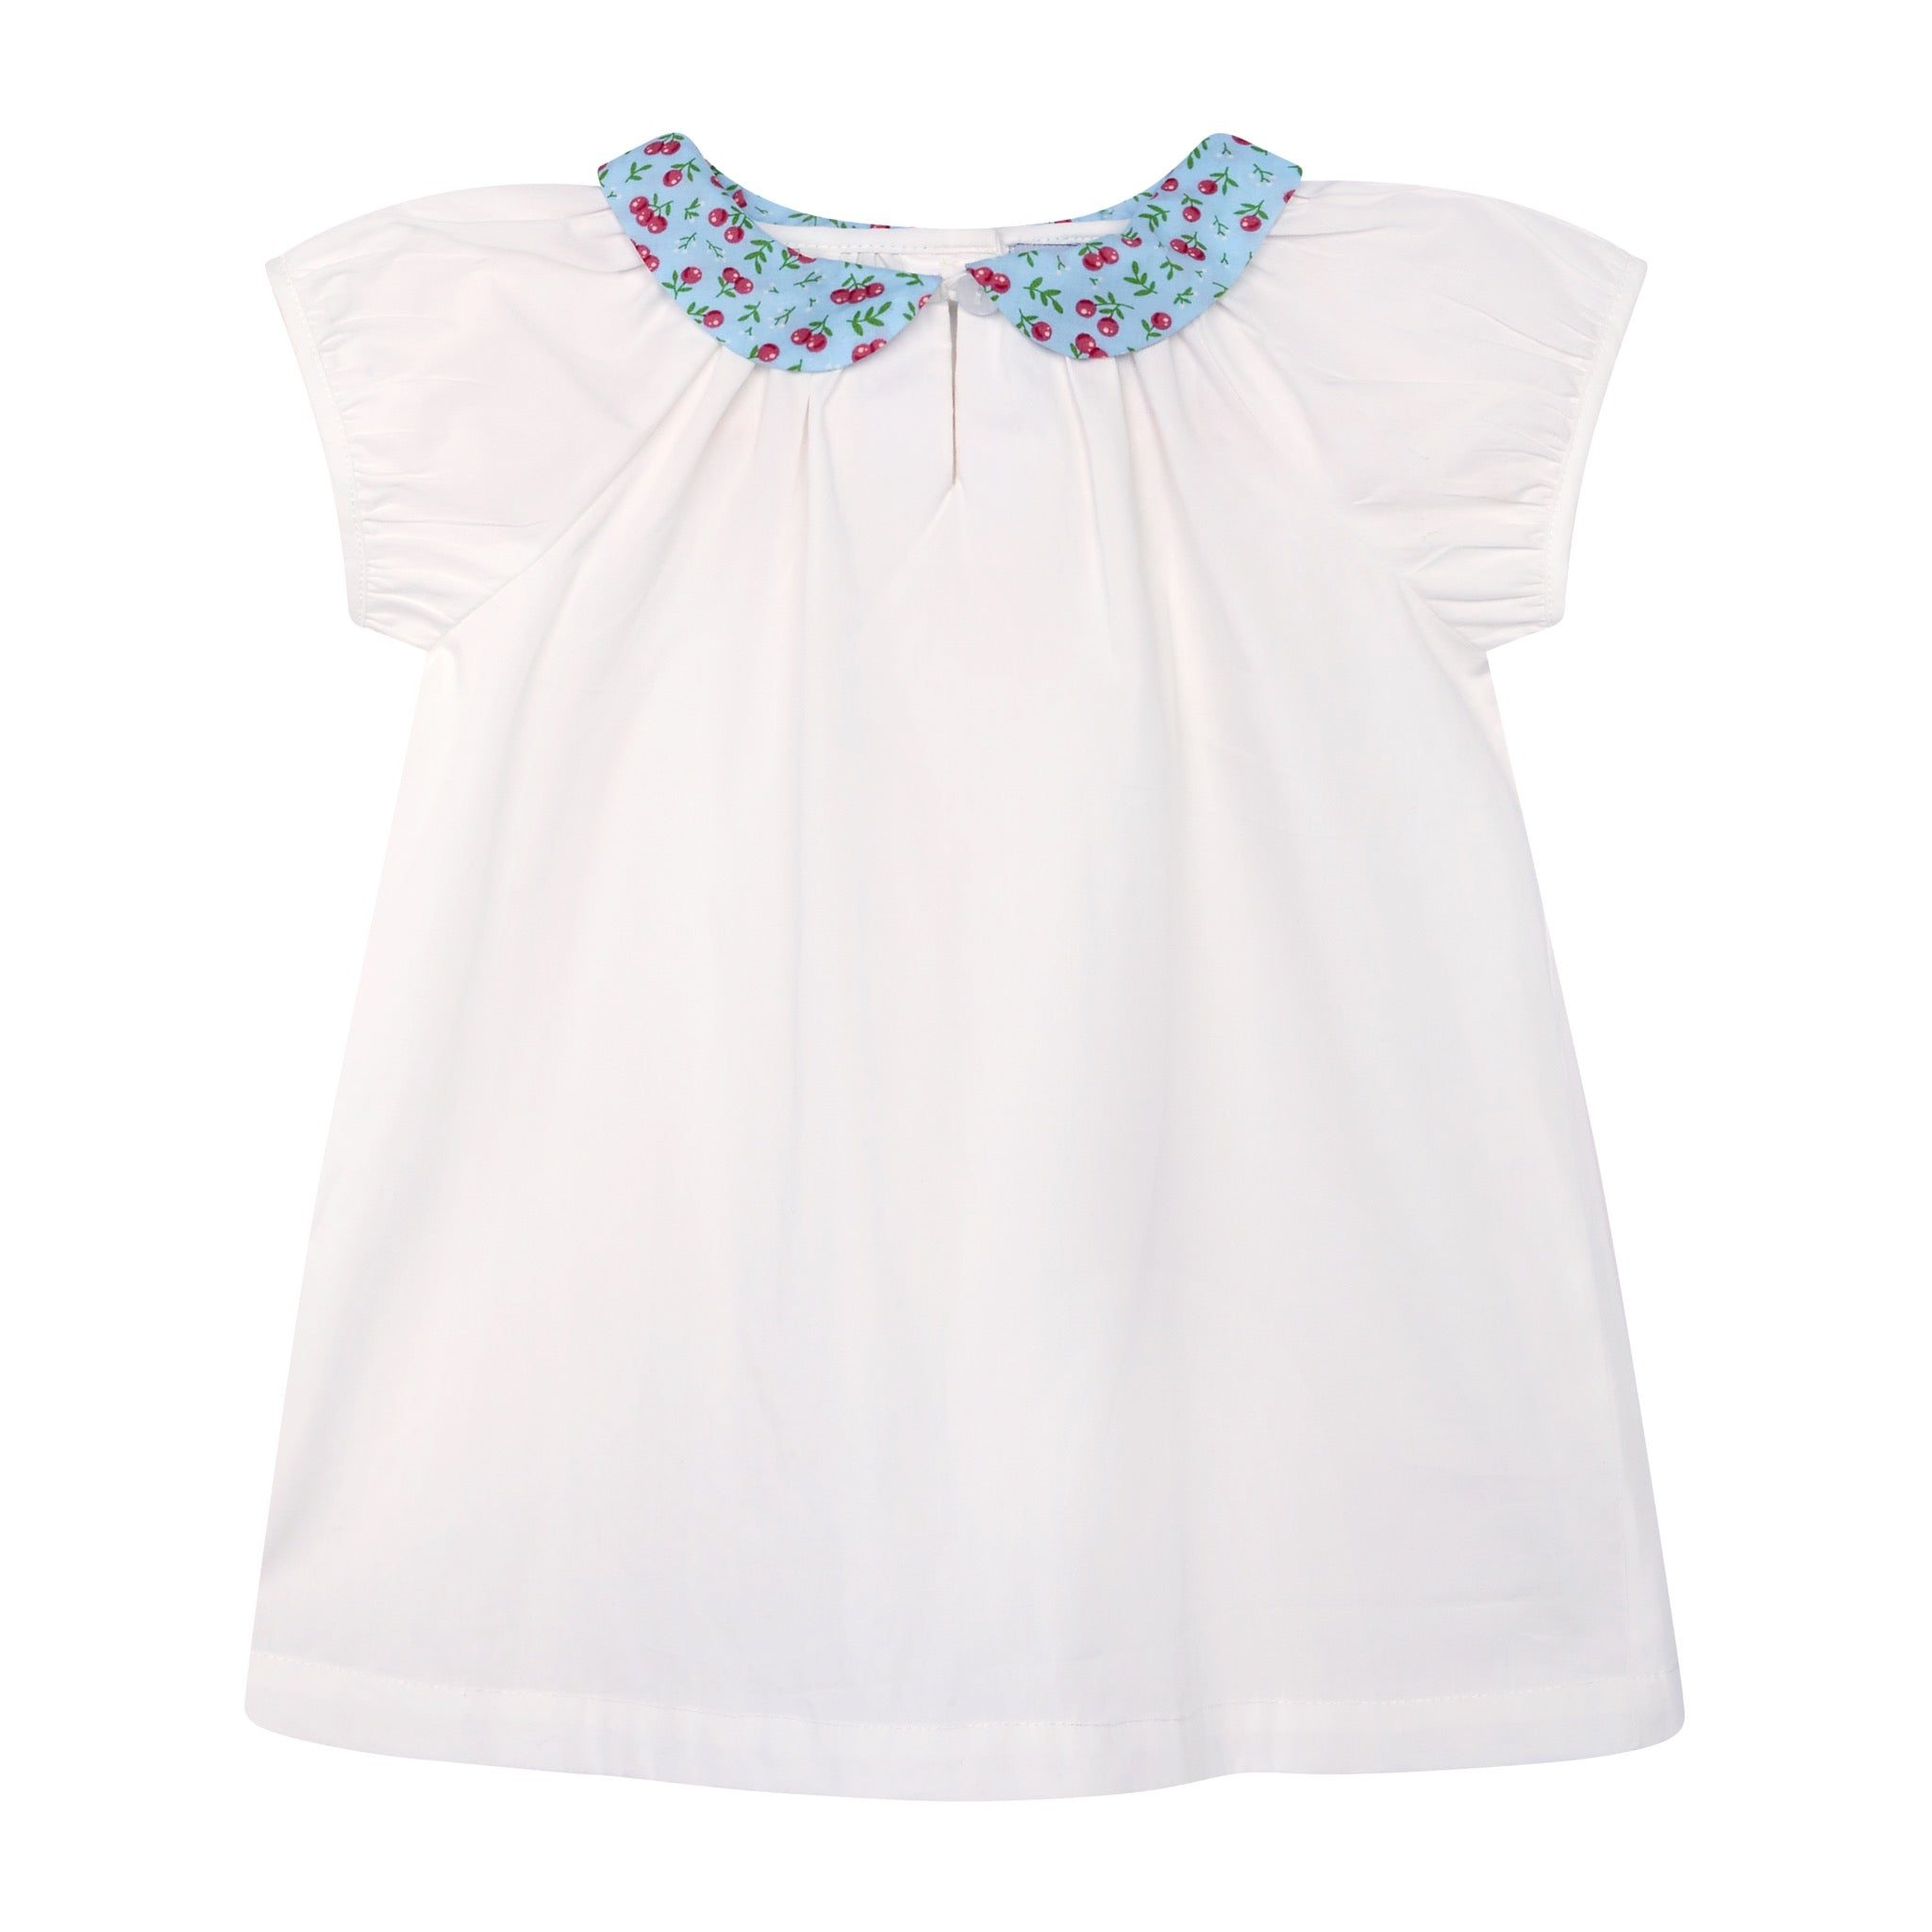 girls blouse with cherry print collar, front